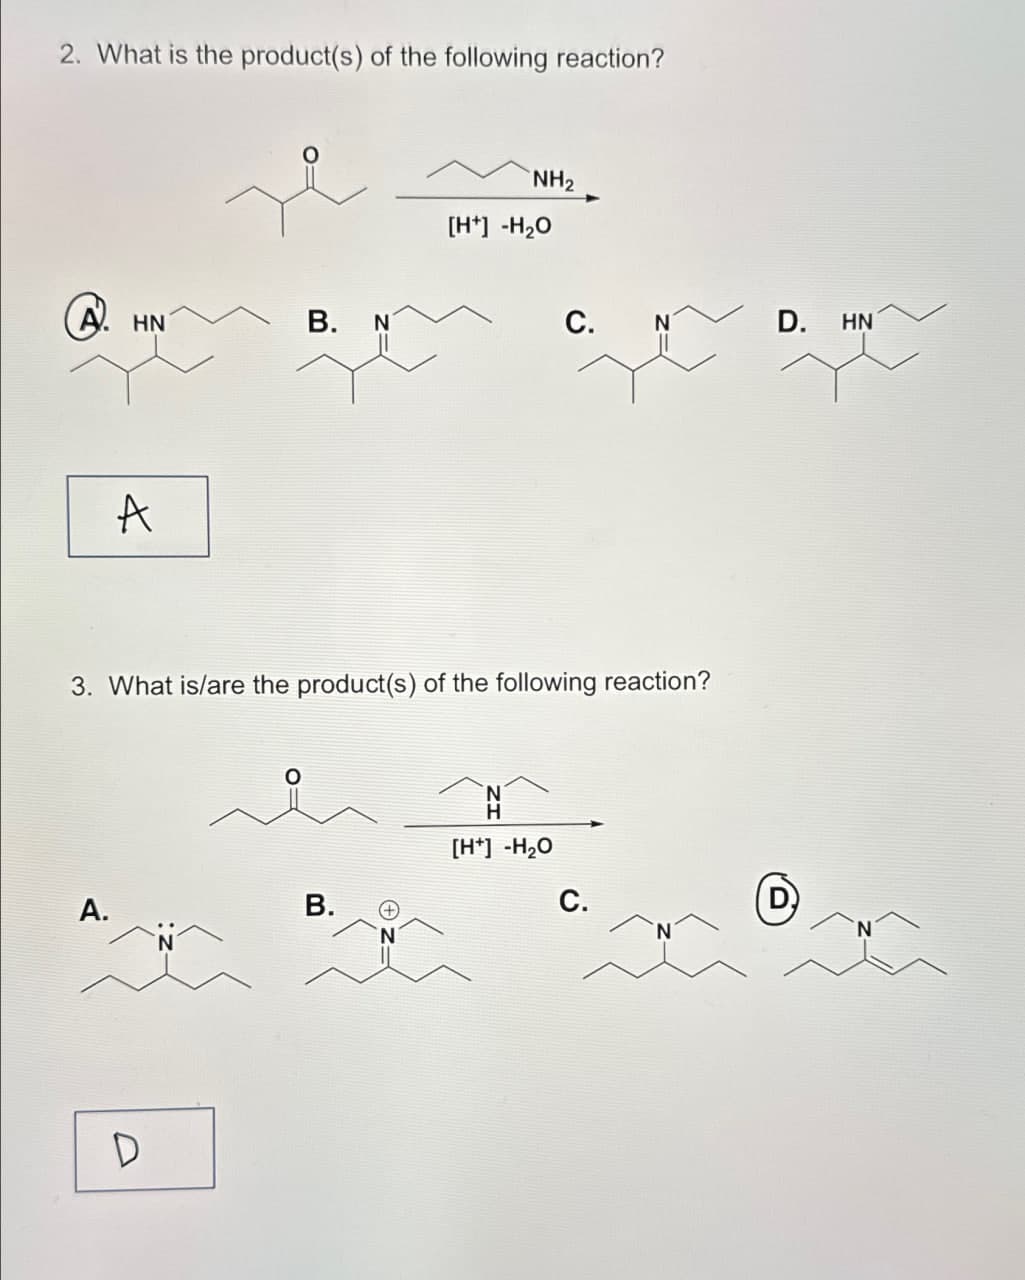 2. What is the product(s) of the following reaction?
A HN
B. N
A
NH2
[H+] -H₂O
C.
D.
HN
3. What is/are the product(s) of the following reaction?
A.
B.
D
[H+] -H₂O
C.